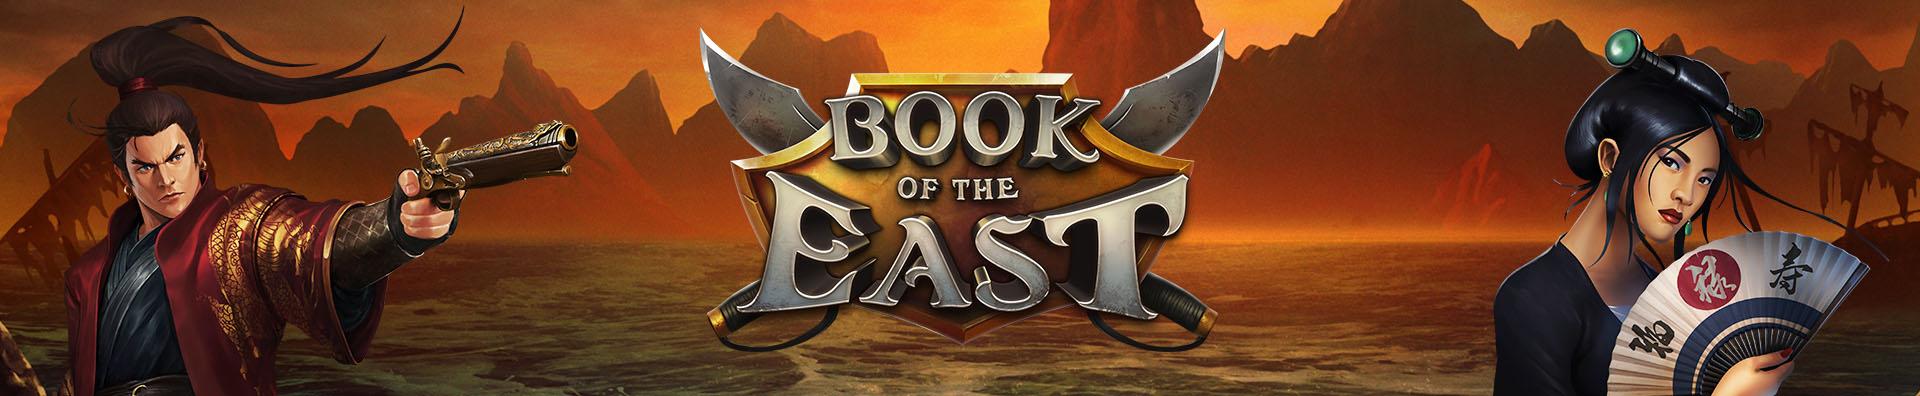 Book of the East - slot